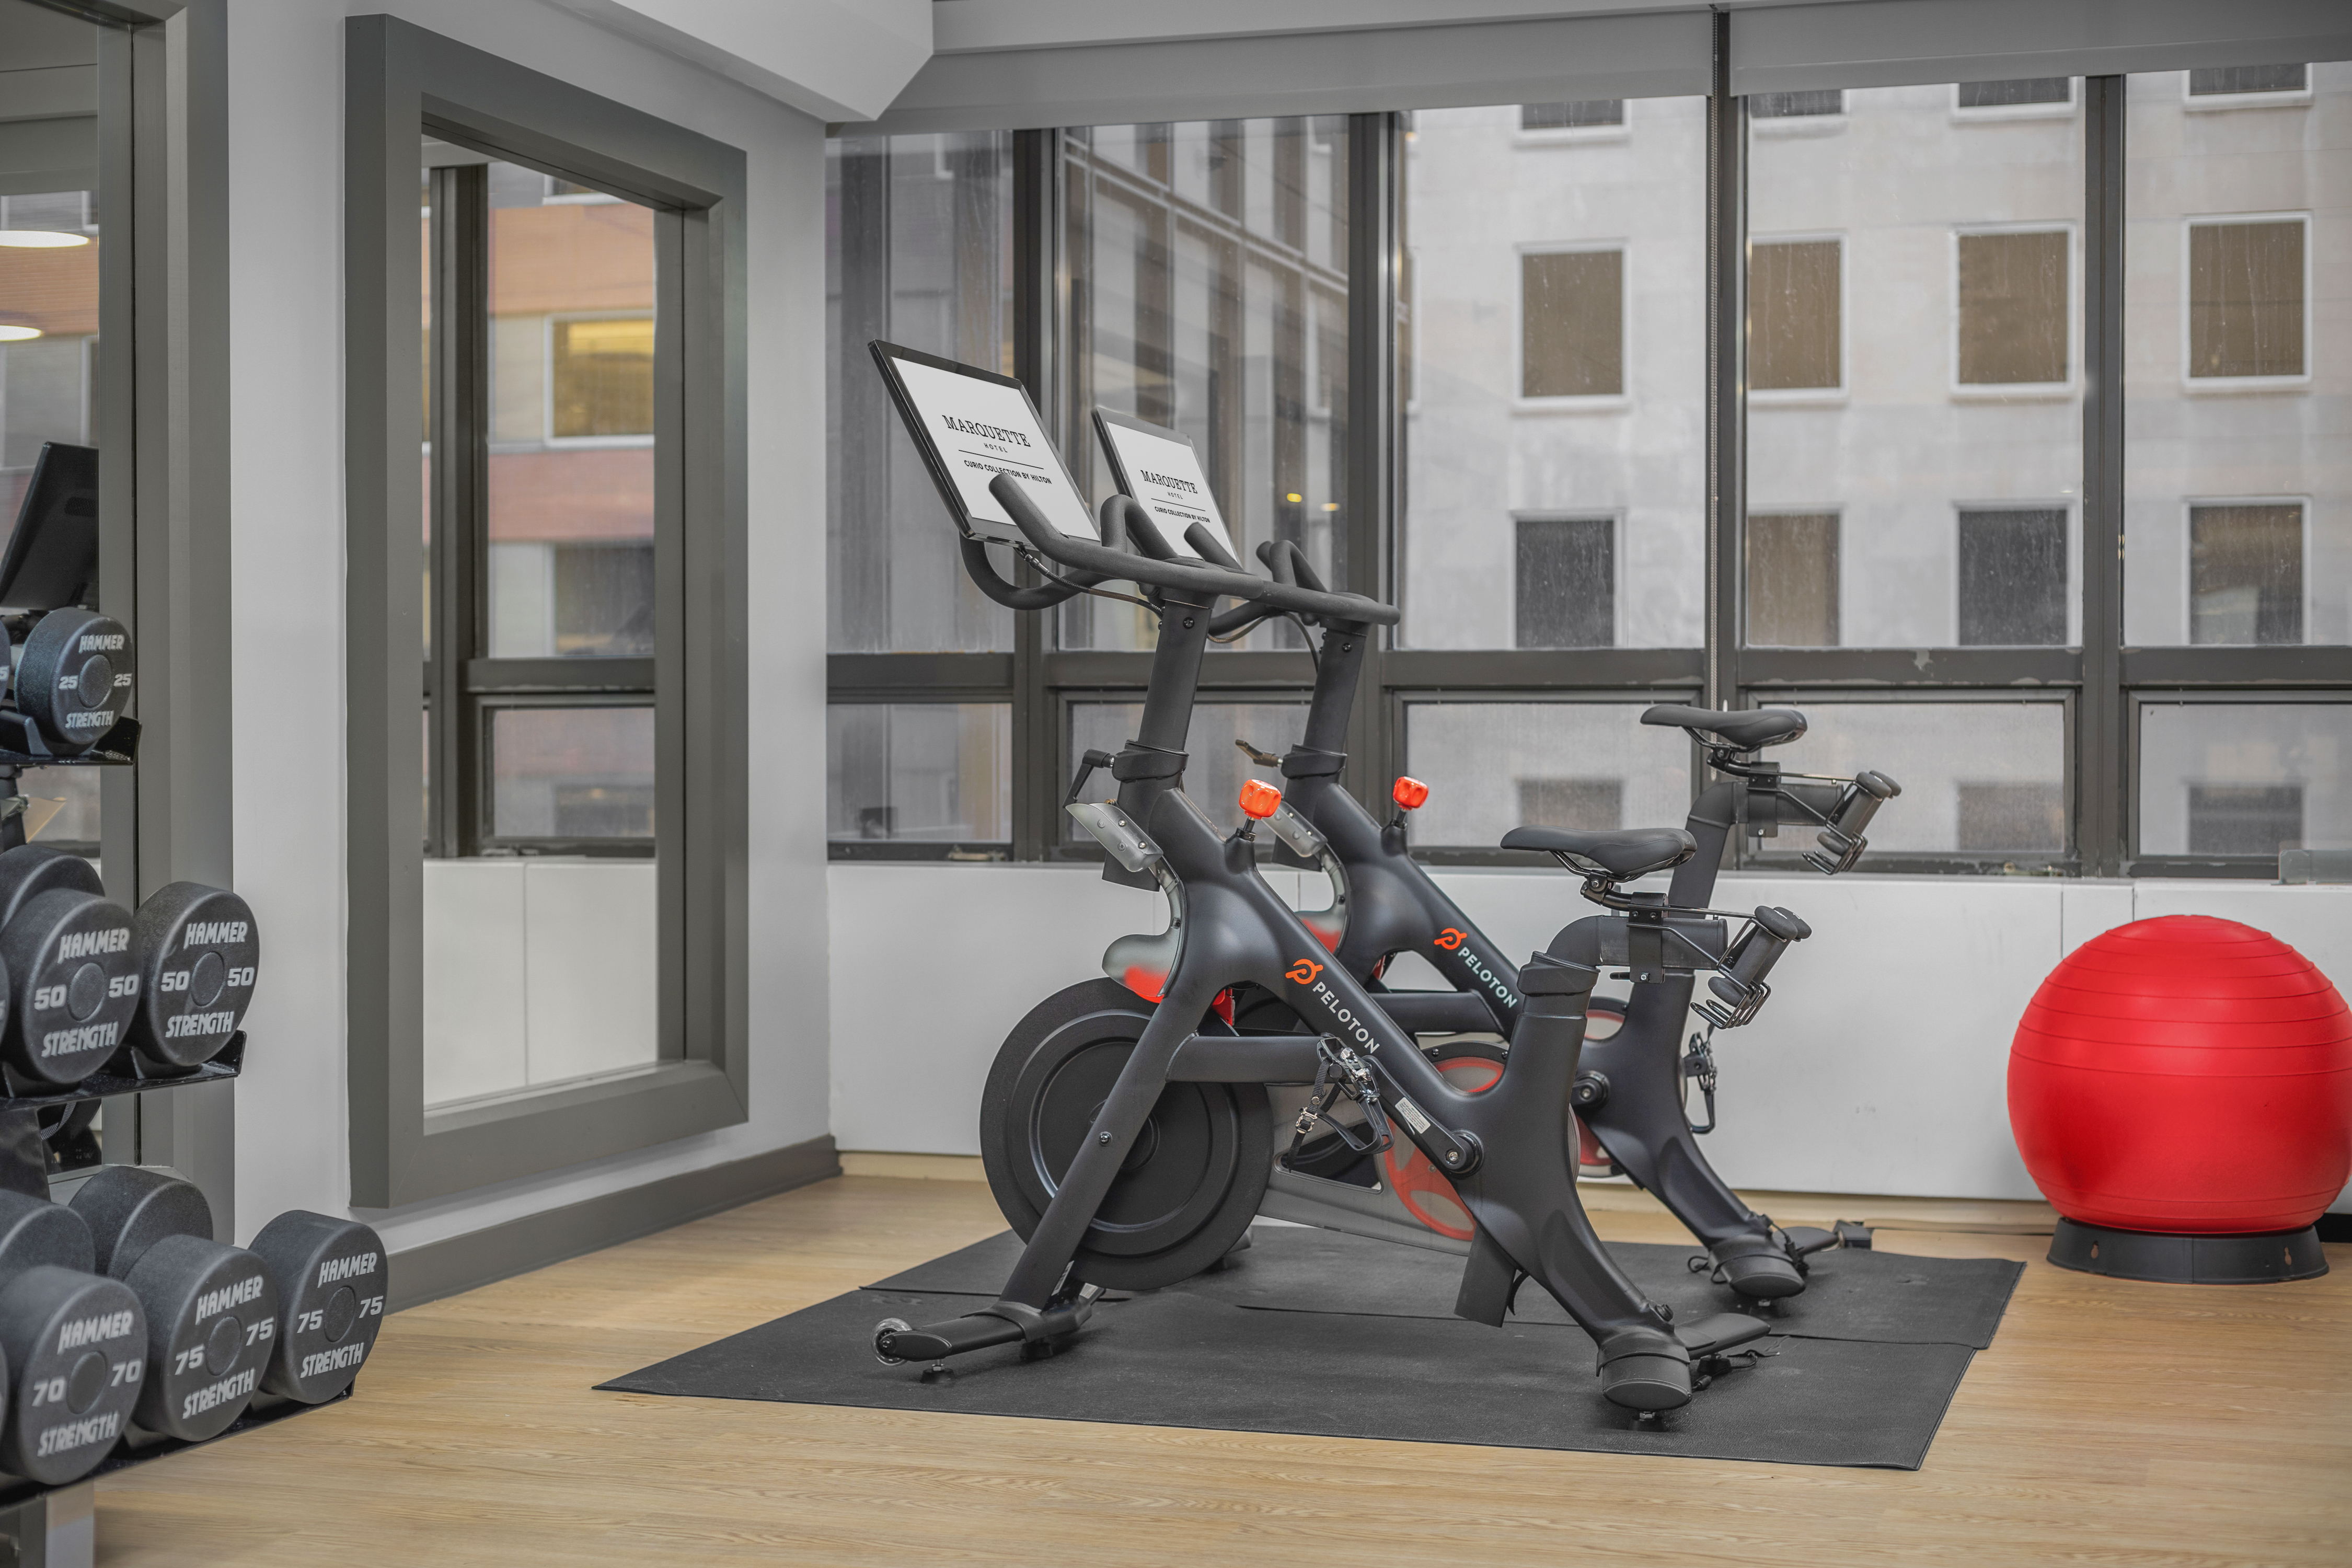 Exercise Bikes and Weights in Fitness Center